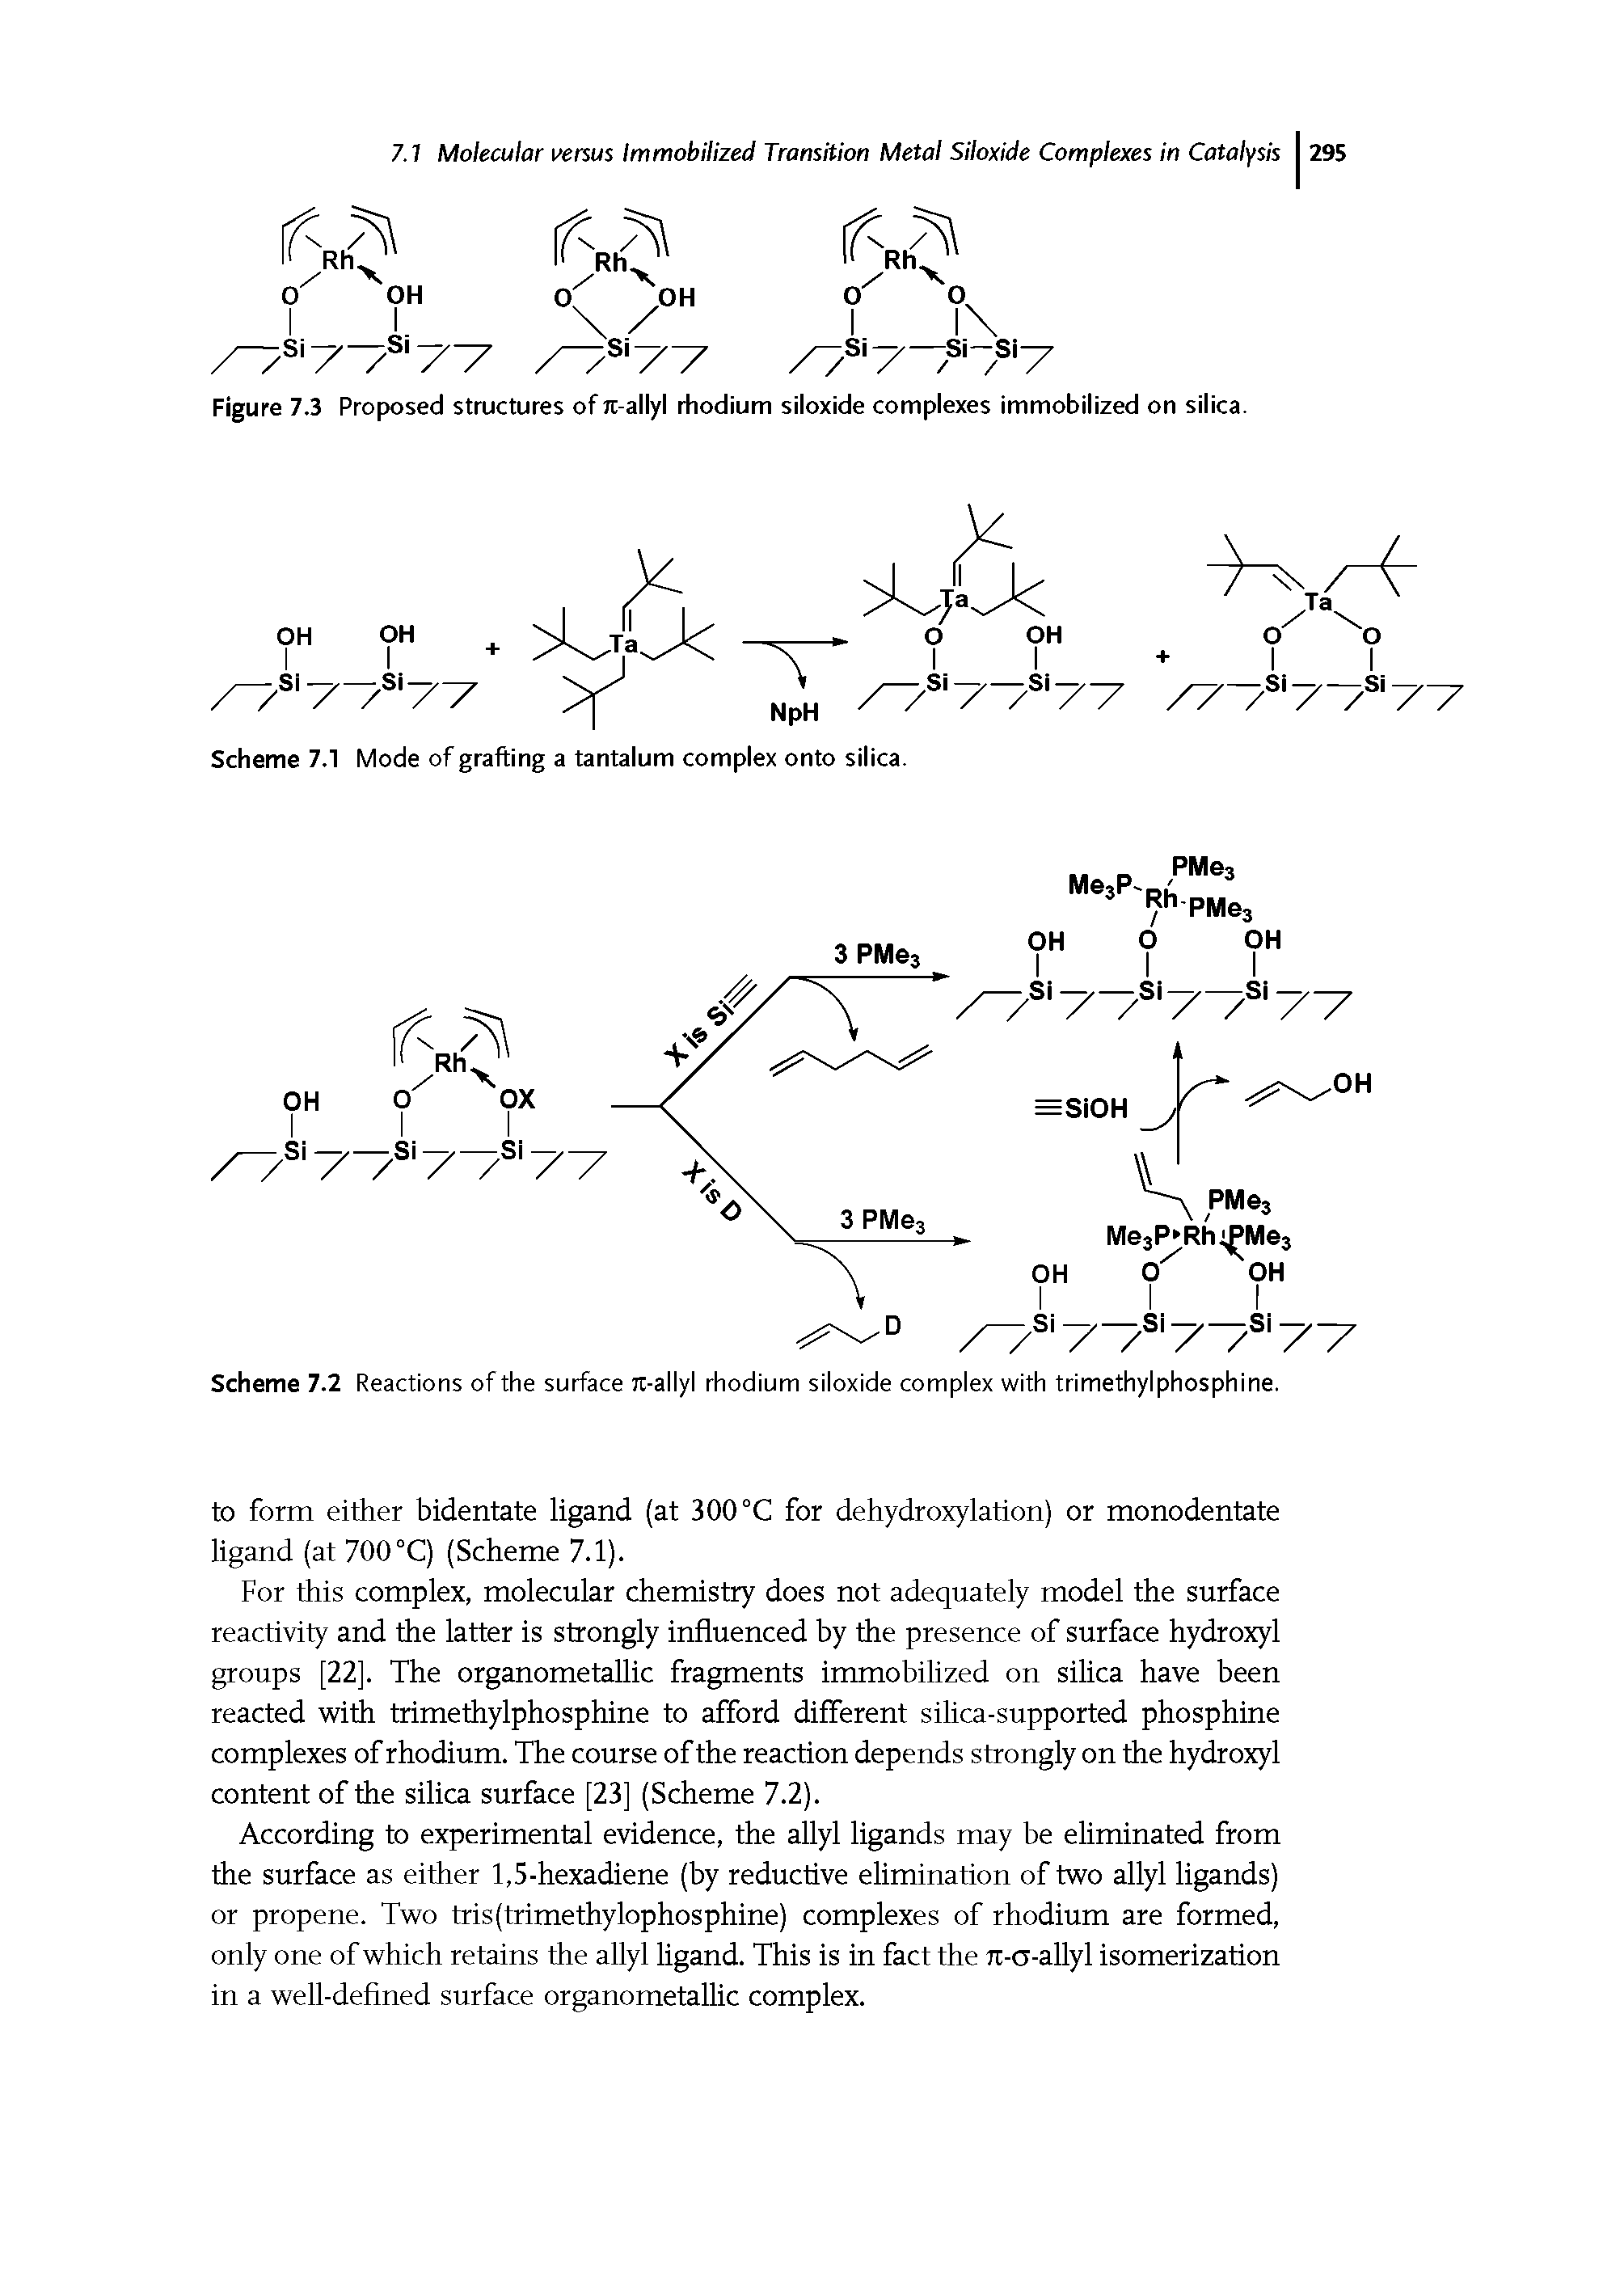 Scheme 7.2 Reactions of the surface 7t-allyl rhodium siloxide complex with trimethylphosphine.